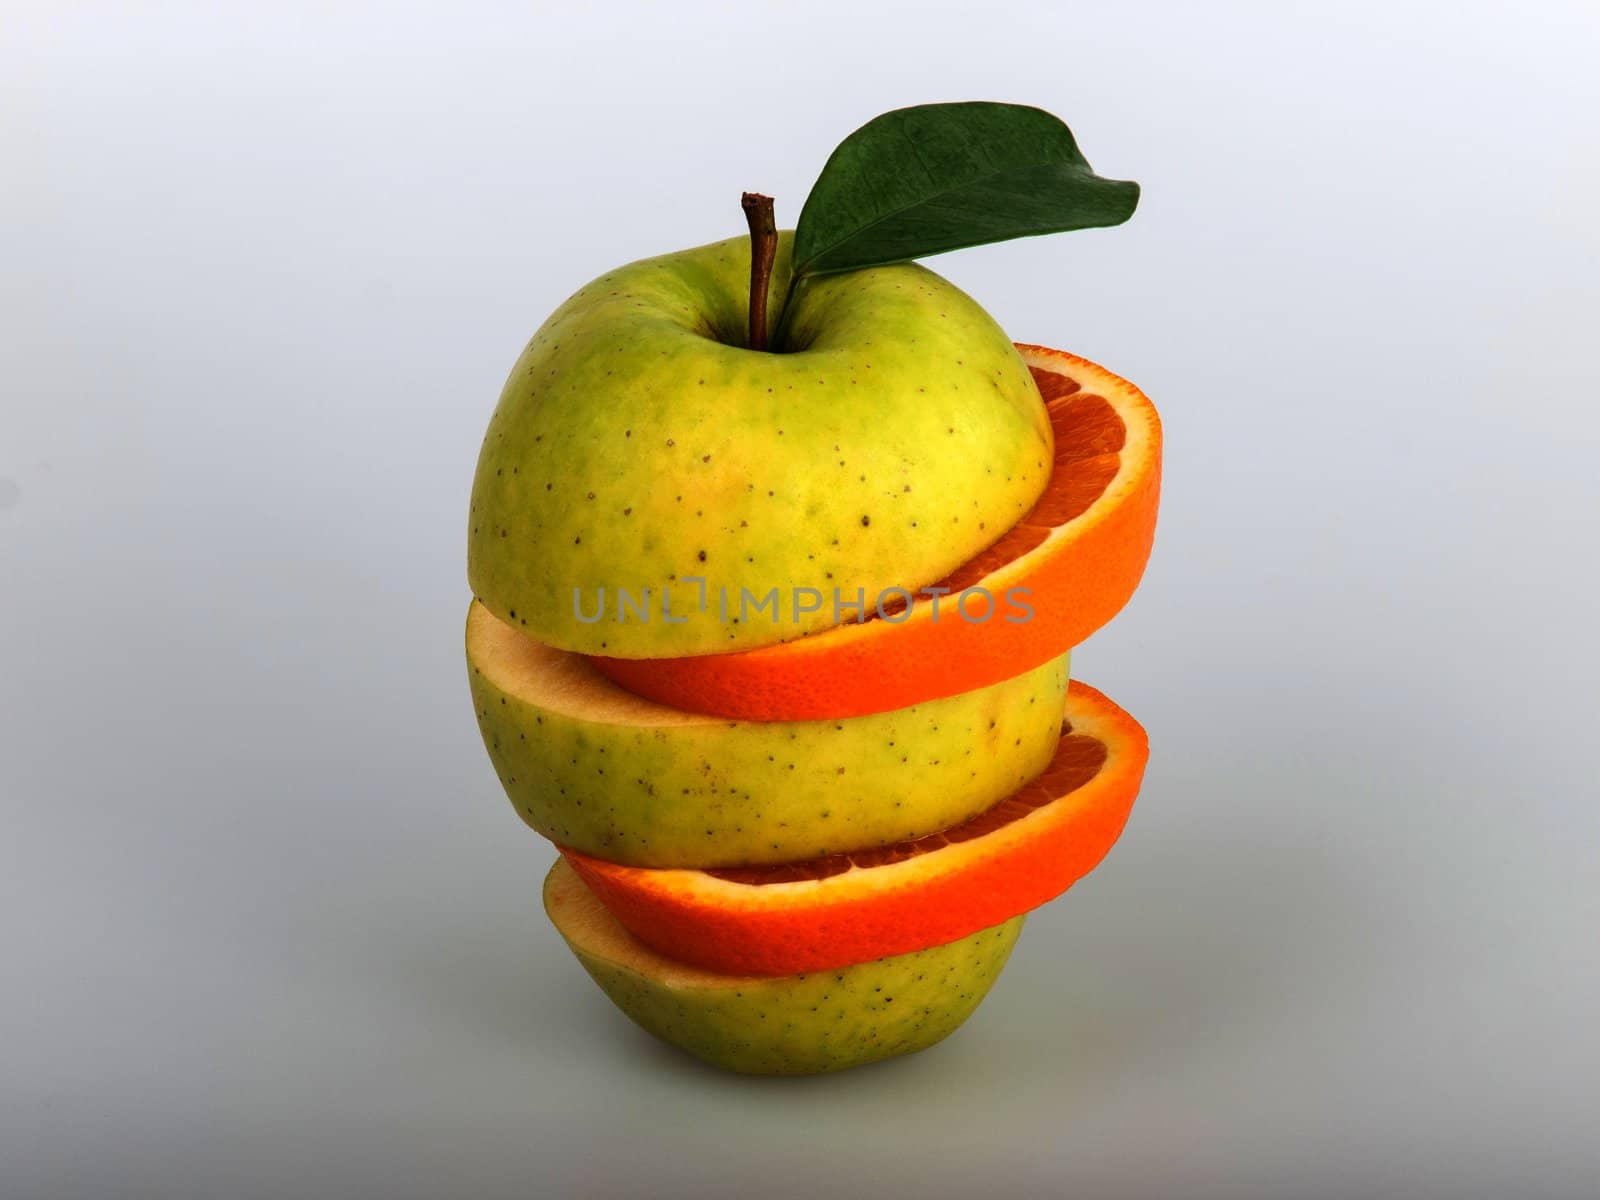 The combination of pieces of apples and oranges